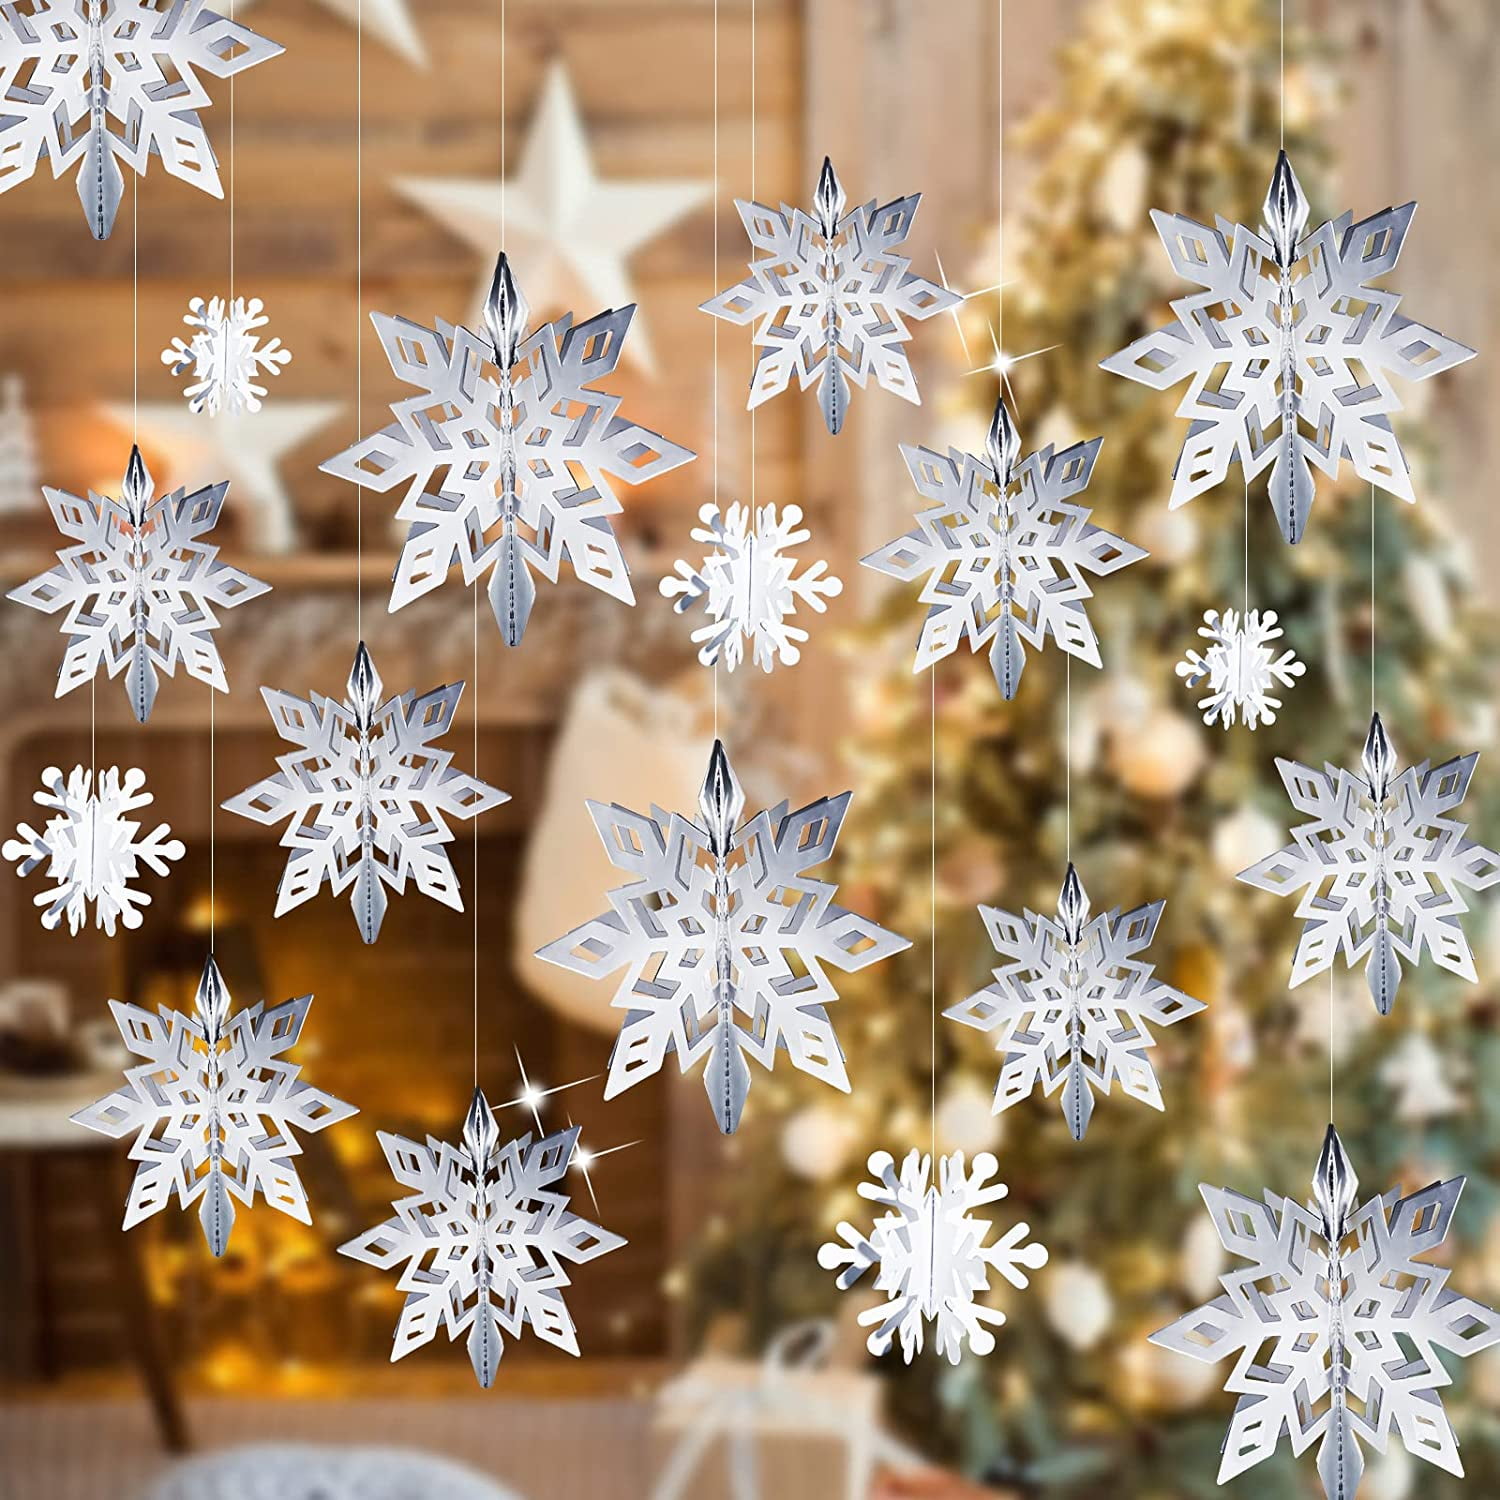  24 Pcs Christmas Hanging Snowflake Decorations 12 pcs 3D Large  Silver Snowflake Ornaments & White Paper Snowflake Garland for Christmas  Winter Wonderland Decorations Frozen Birthday Party Supplies : Home &  Kitchen